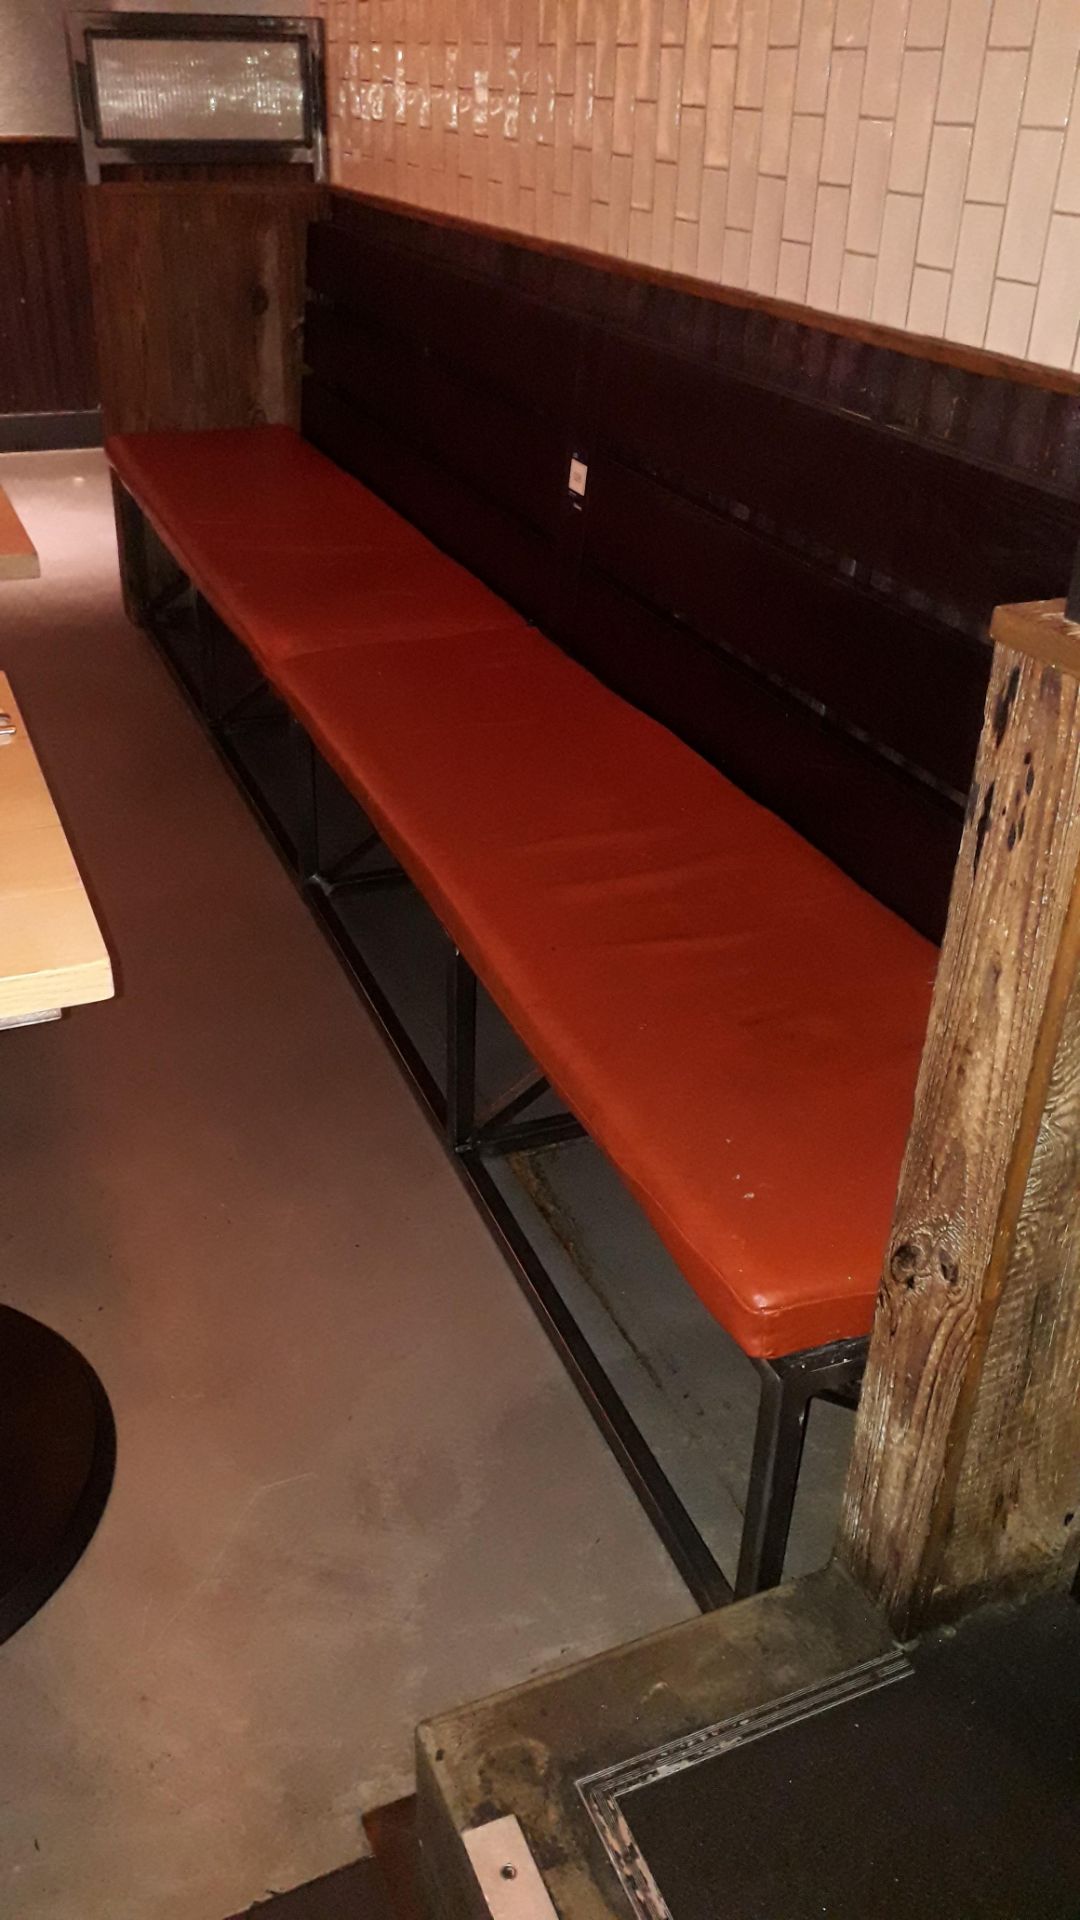 Steel Framed Timber Slat Bench with Loose Leather Cushions 3350mm - Image 2 of 2